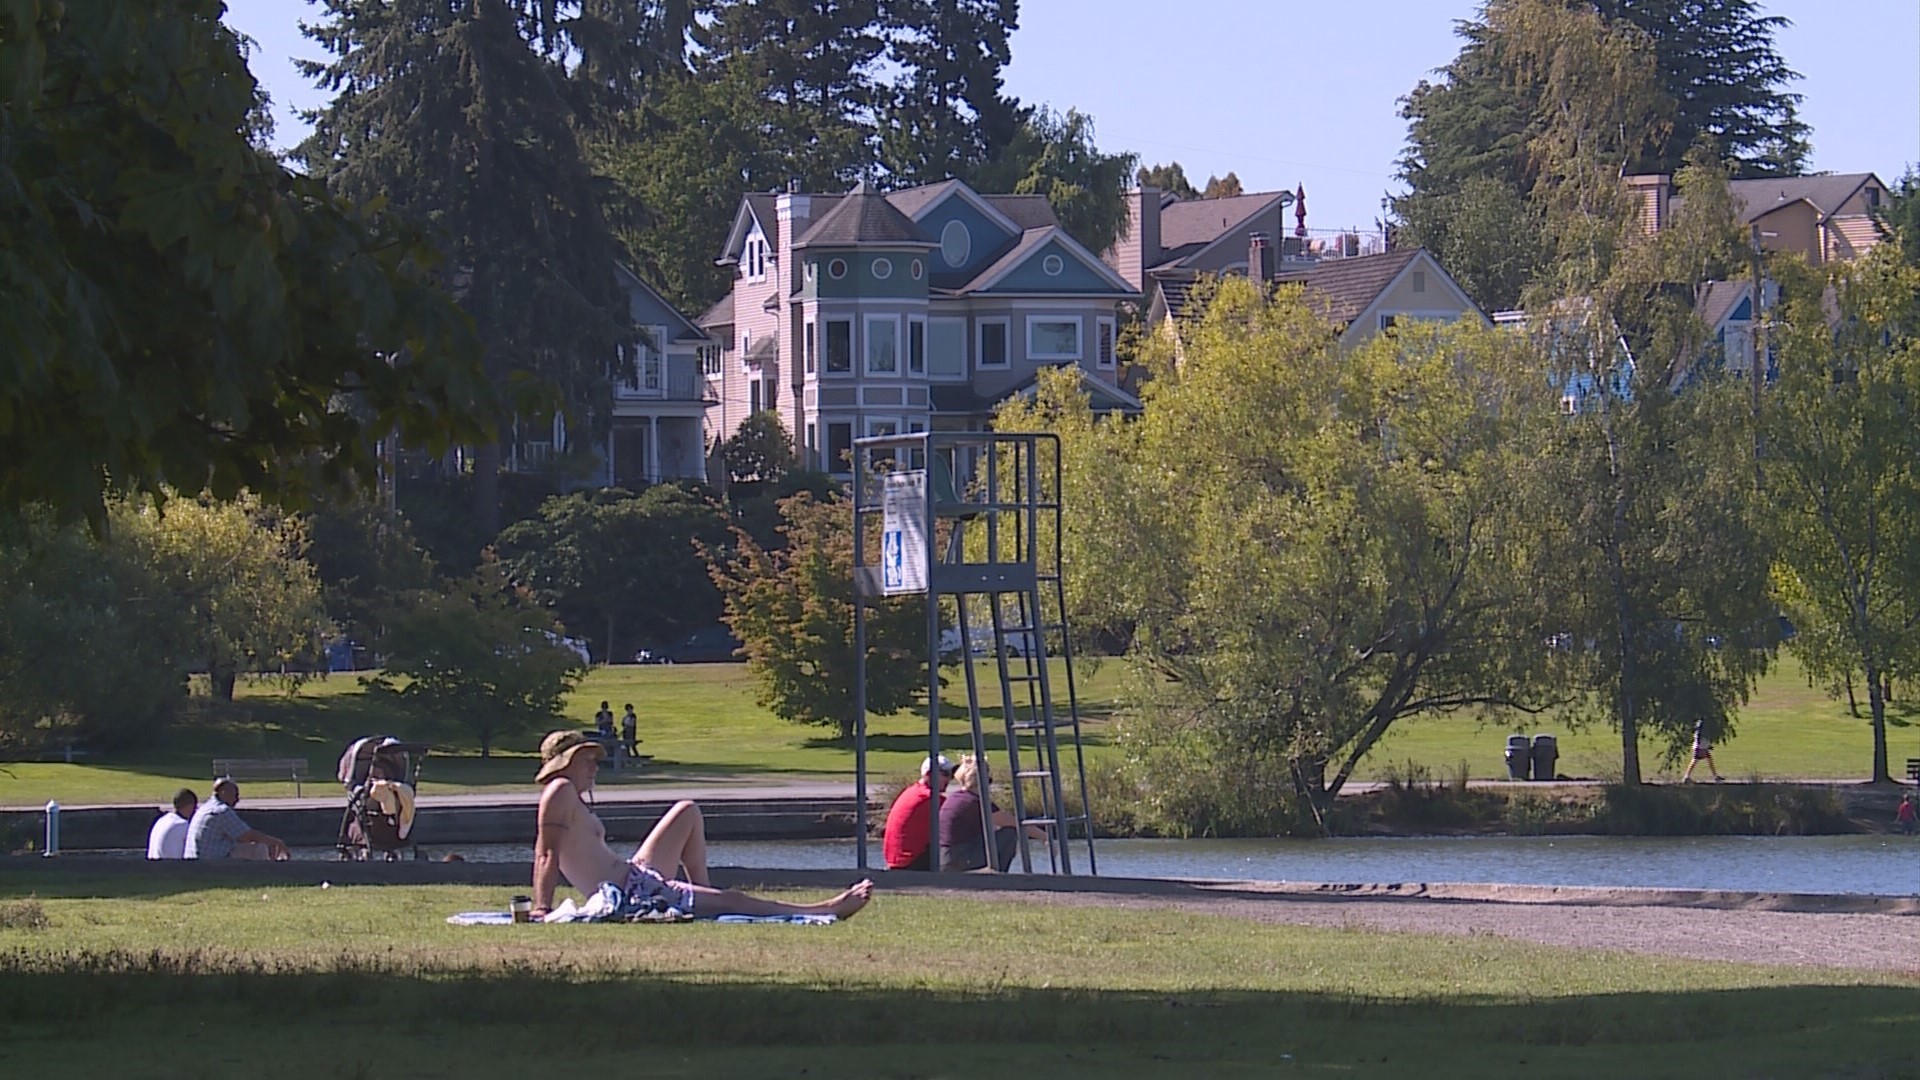 Rain or shine, Green Lake Park is one of the most popular spots in Seattle -- but there's more than meets the eye. Sponsored by Windermere Real Estate.